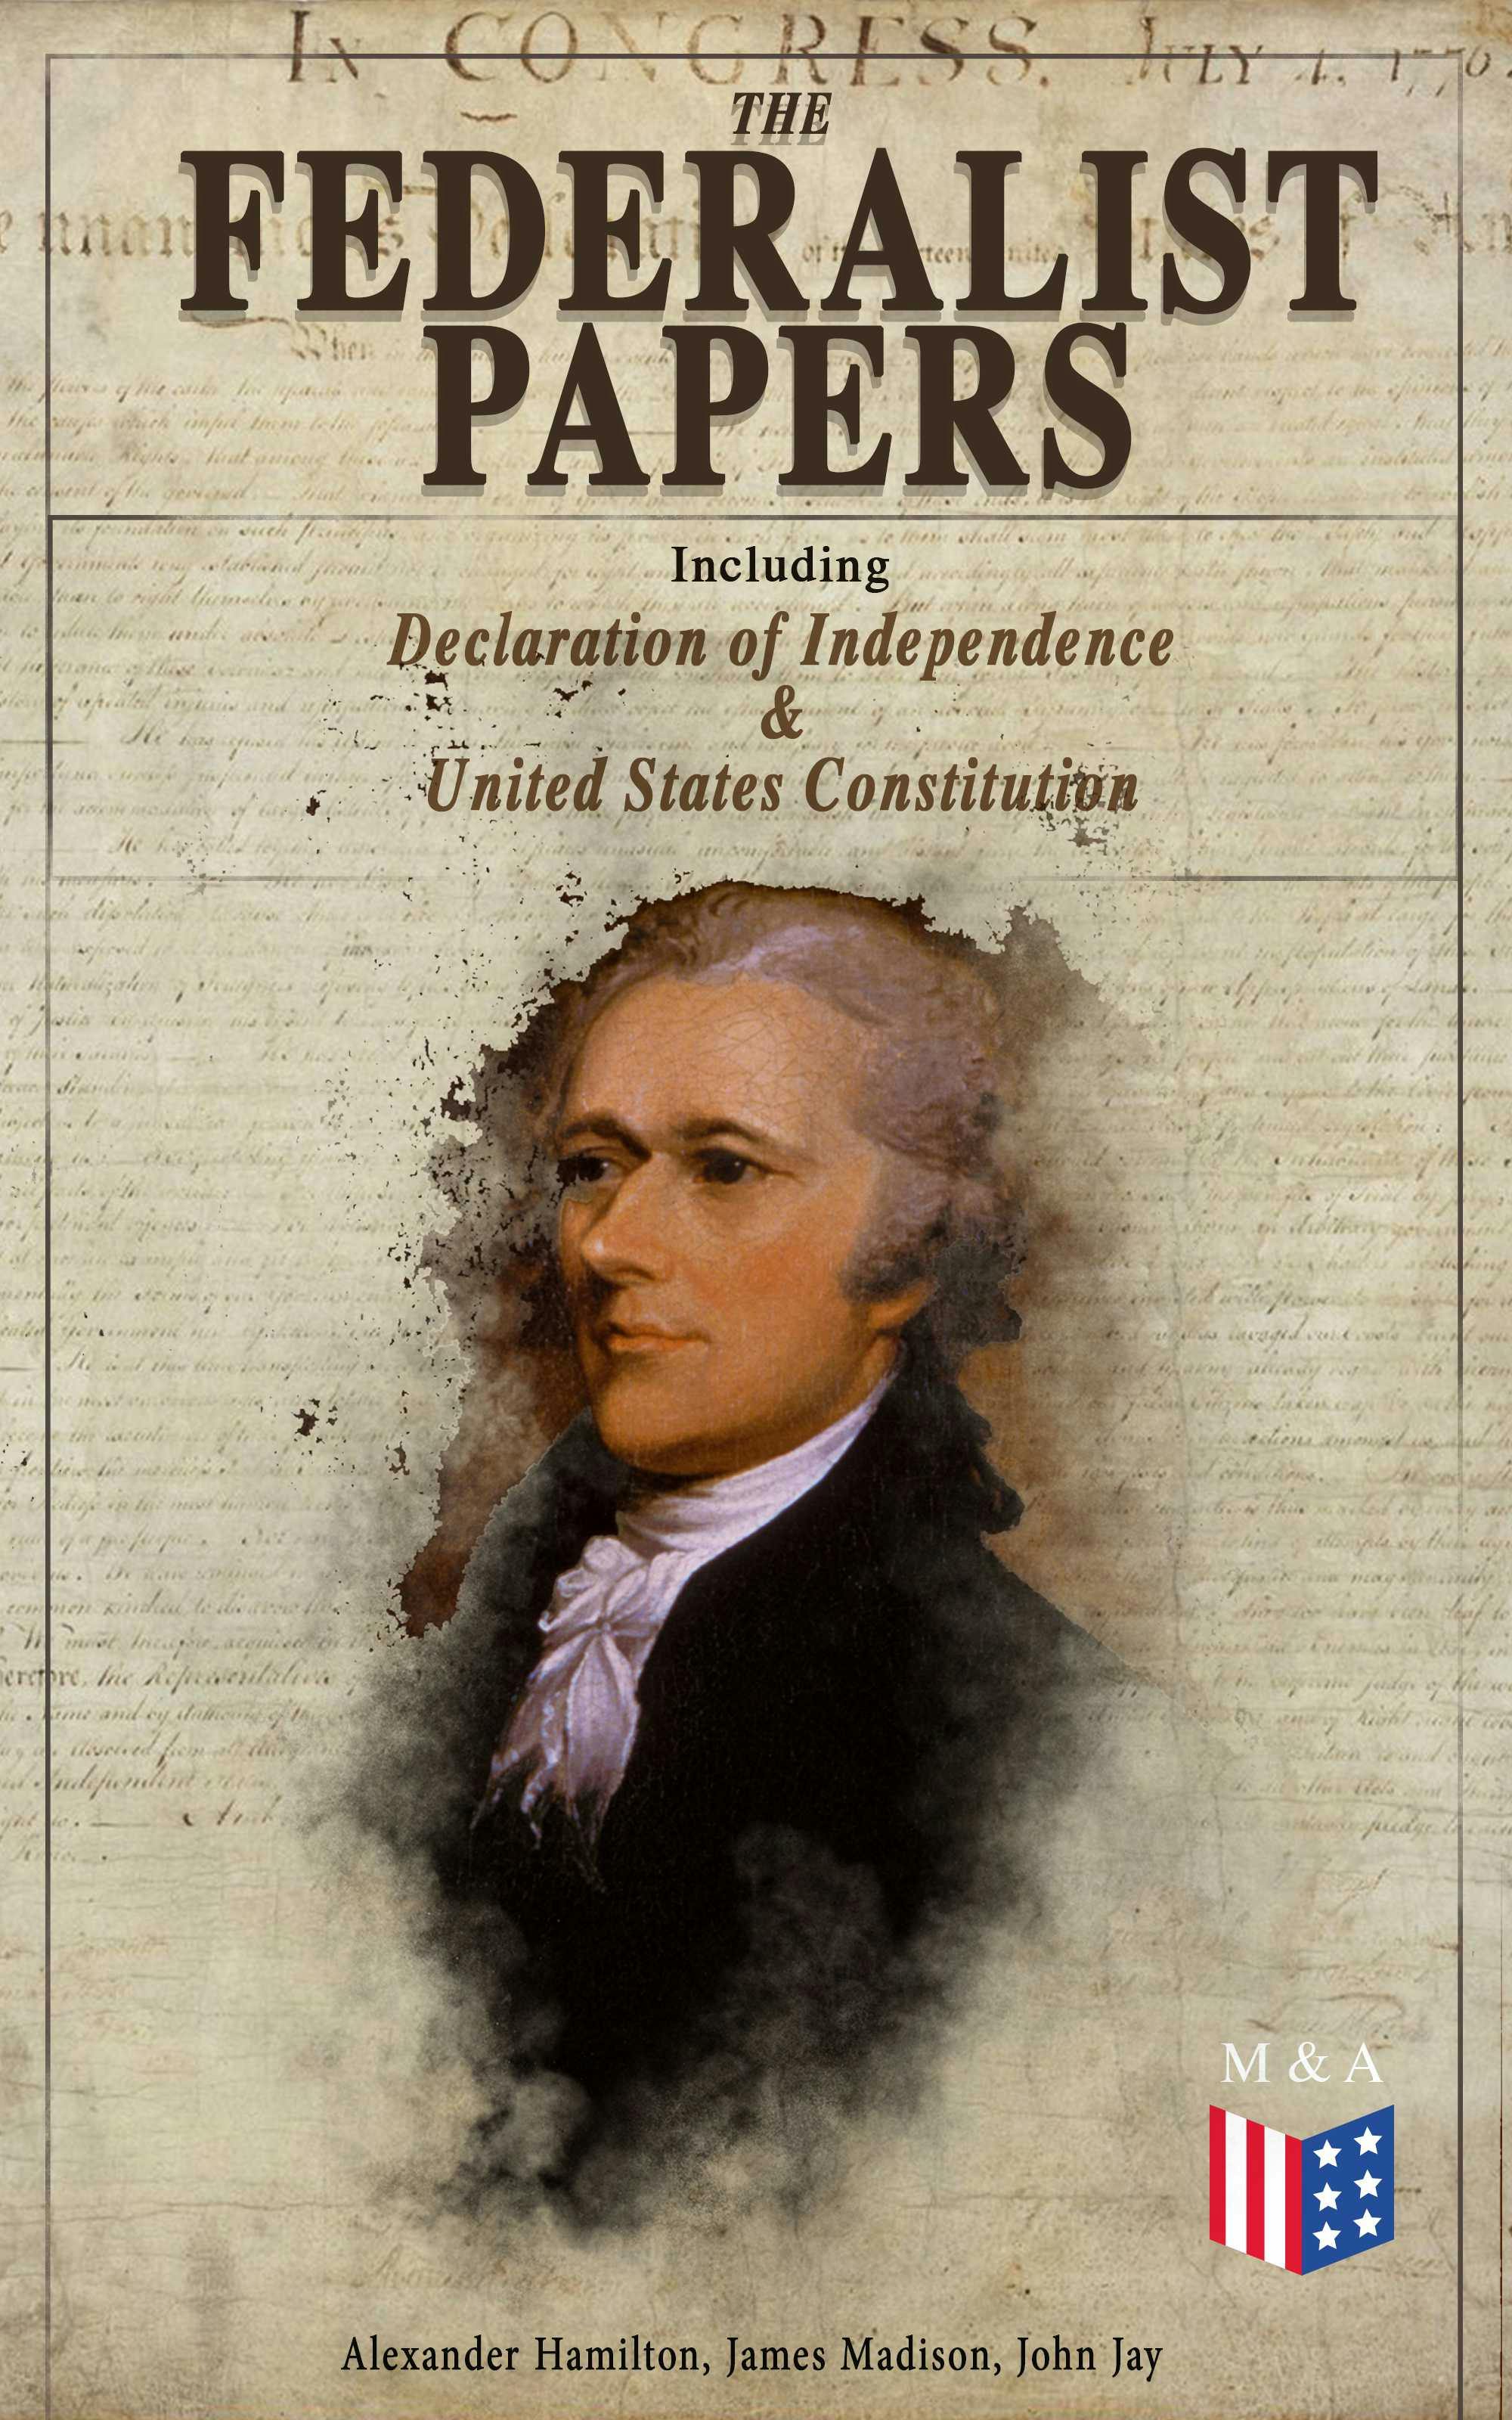 The Federalist Papers (Including Declaration of Independence & United States Constitution): Written by the Founding Fathers in Favor of the Constitution – Arguments that Created the Modern America - James Madison, Alexander Hamilton, John Jay